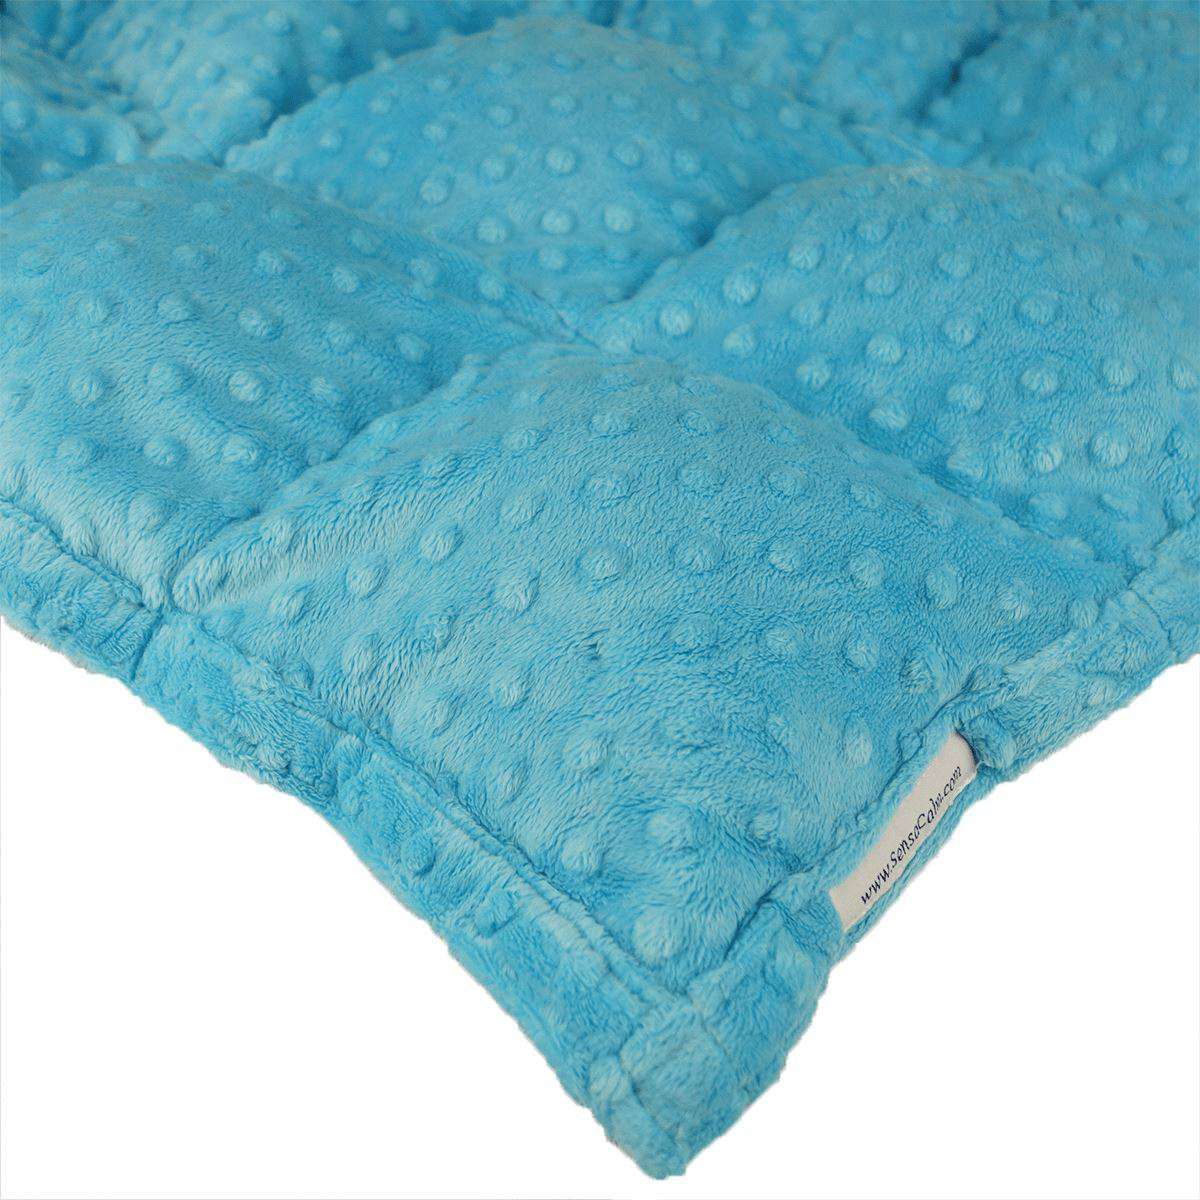 Cuddle Weighted Blanket - Dimple Turquoise